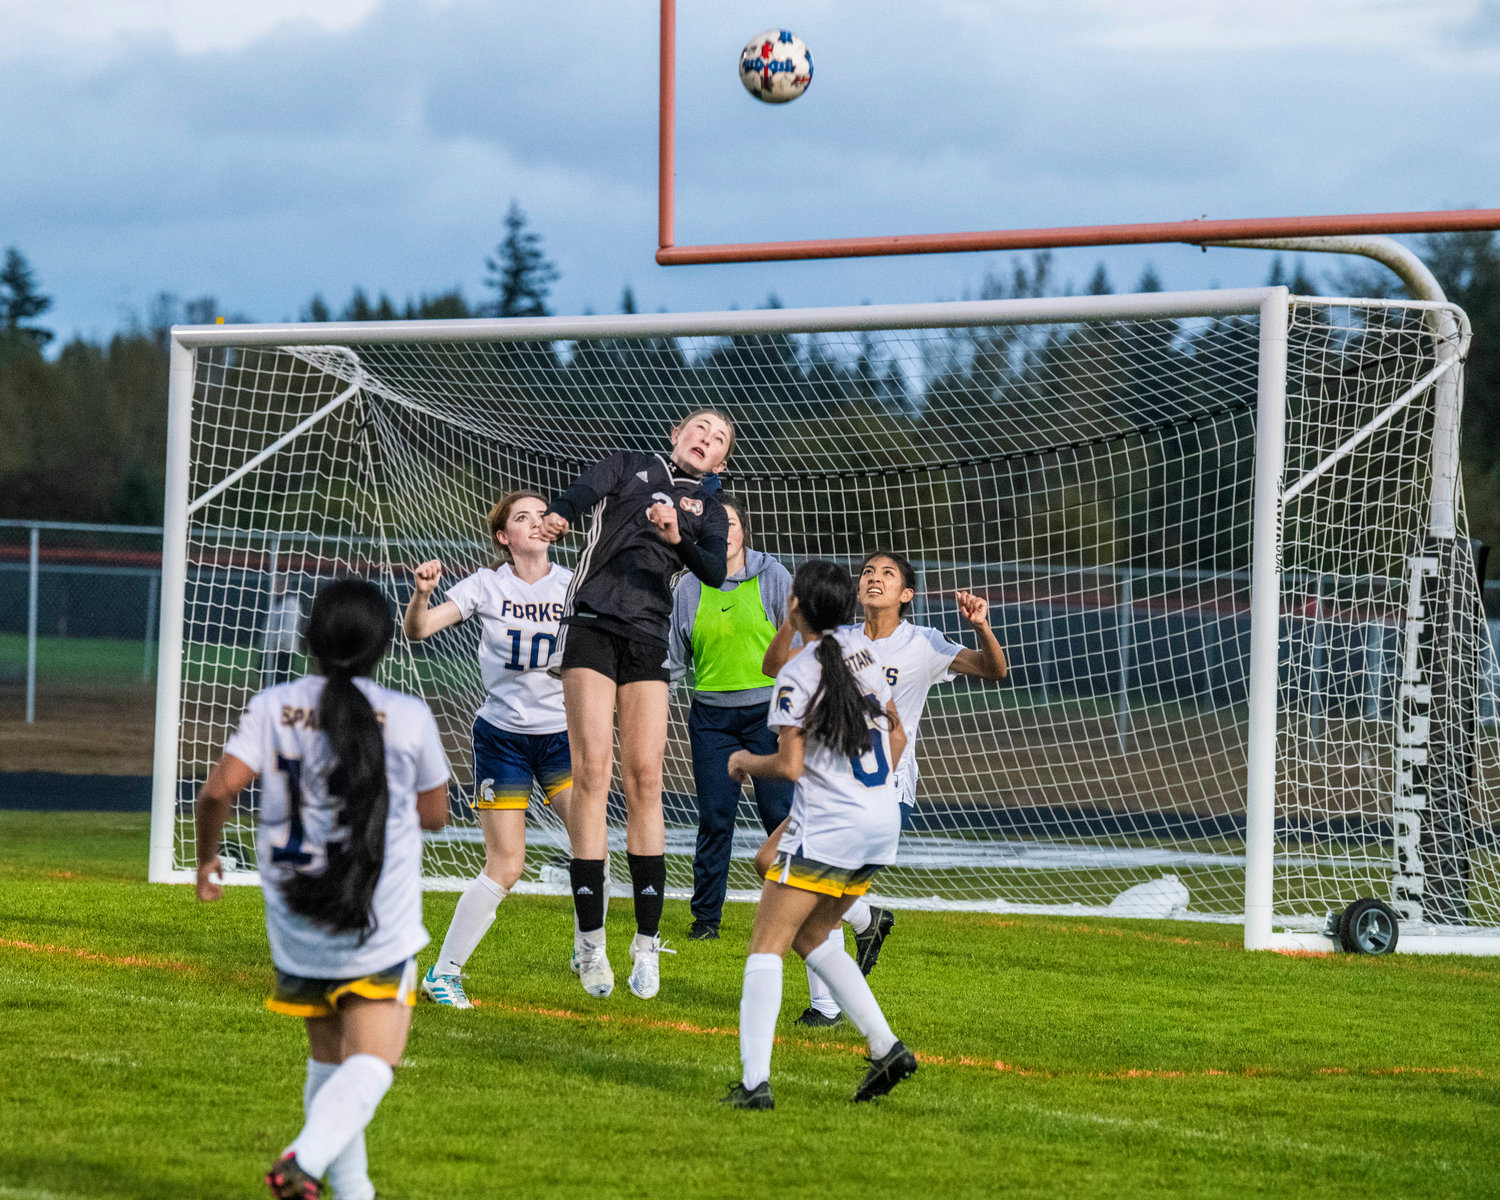 Napavine freshman Hayden Kaut (3) makes a header towards the goal Monday night at Tiger Field during a game against Forks.